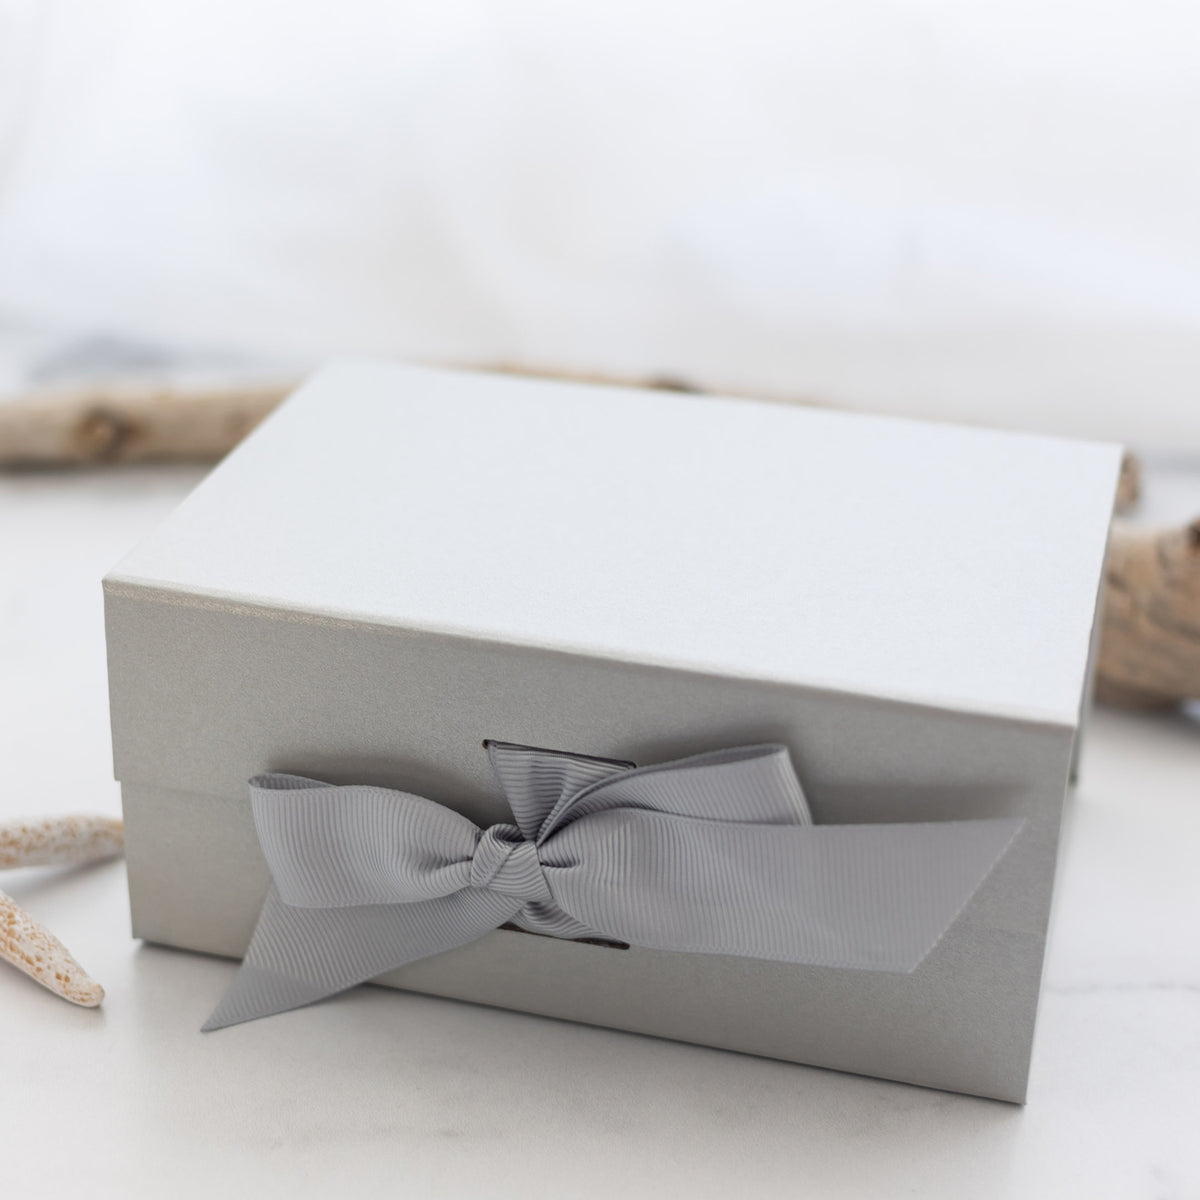 closed gray gift box with a bow